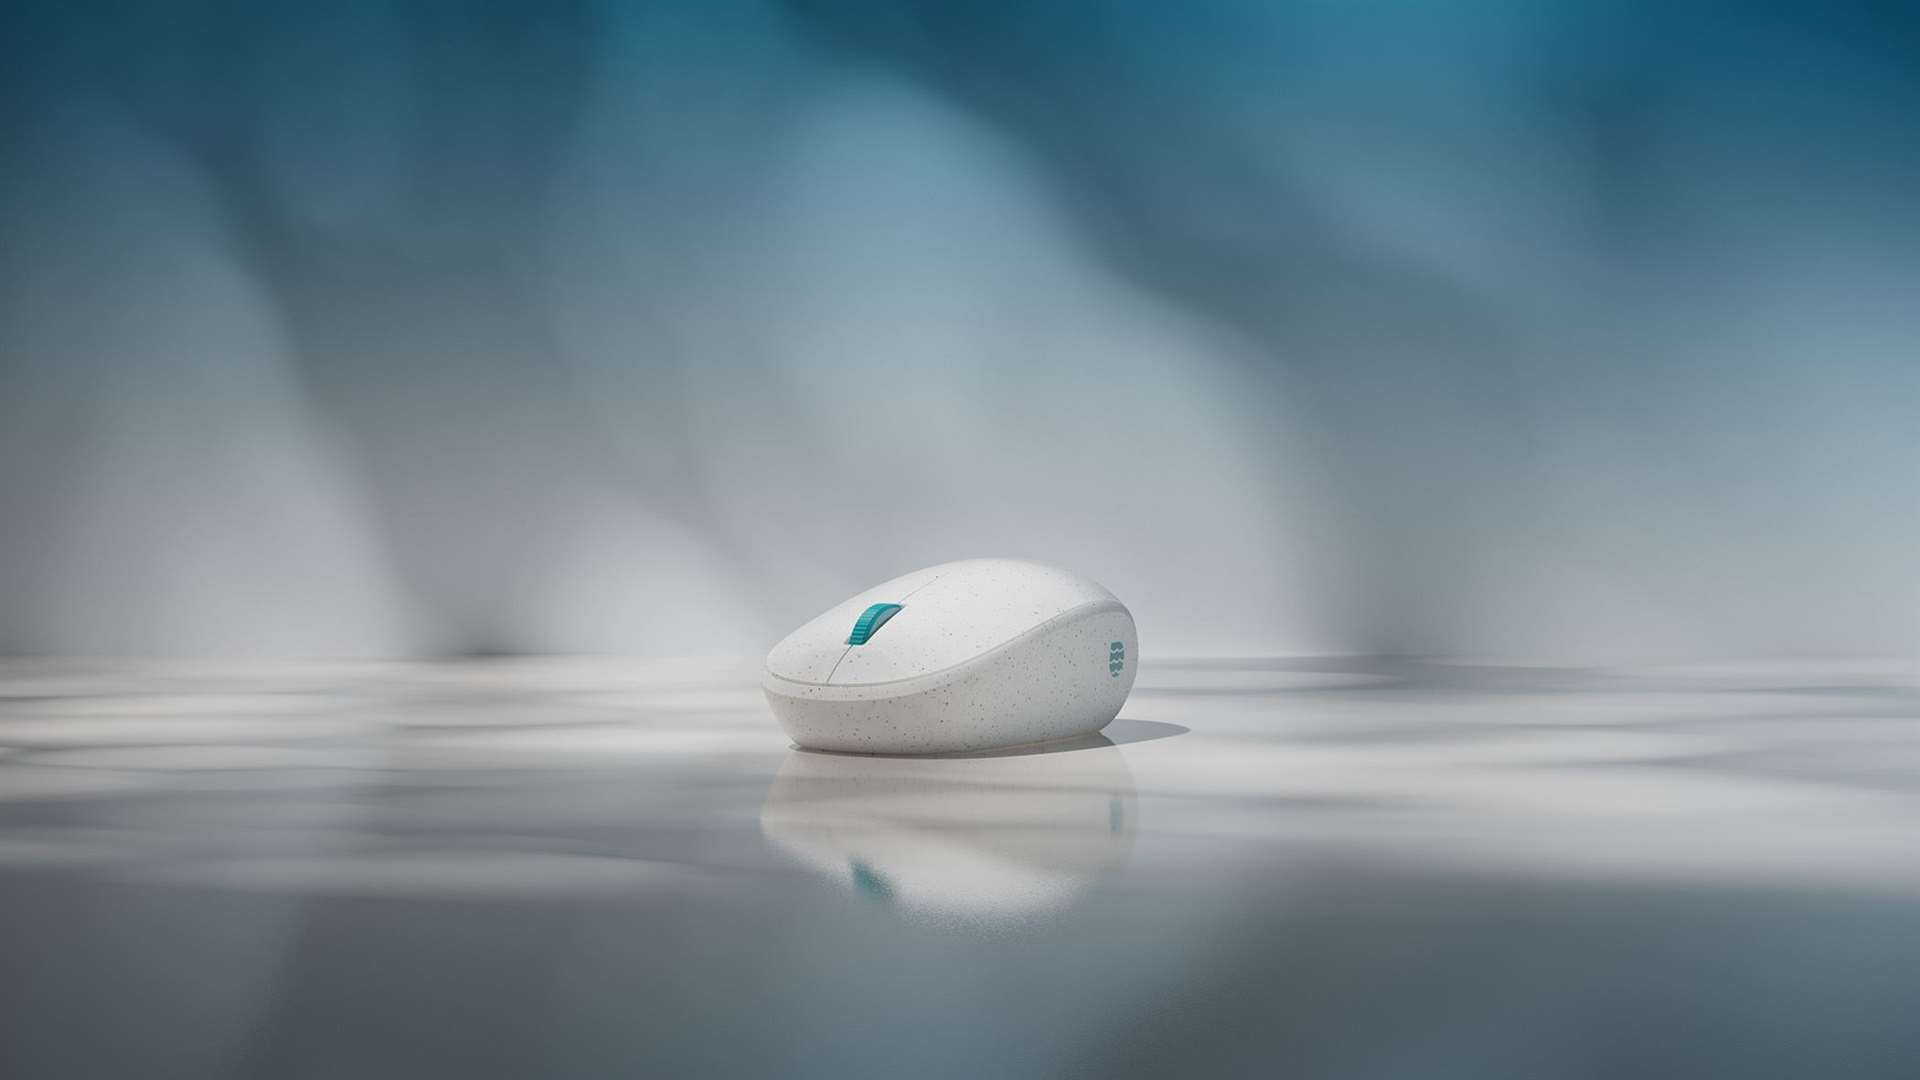 The mouse has been created using 20% recycled ocean plastics (Microsoft)